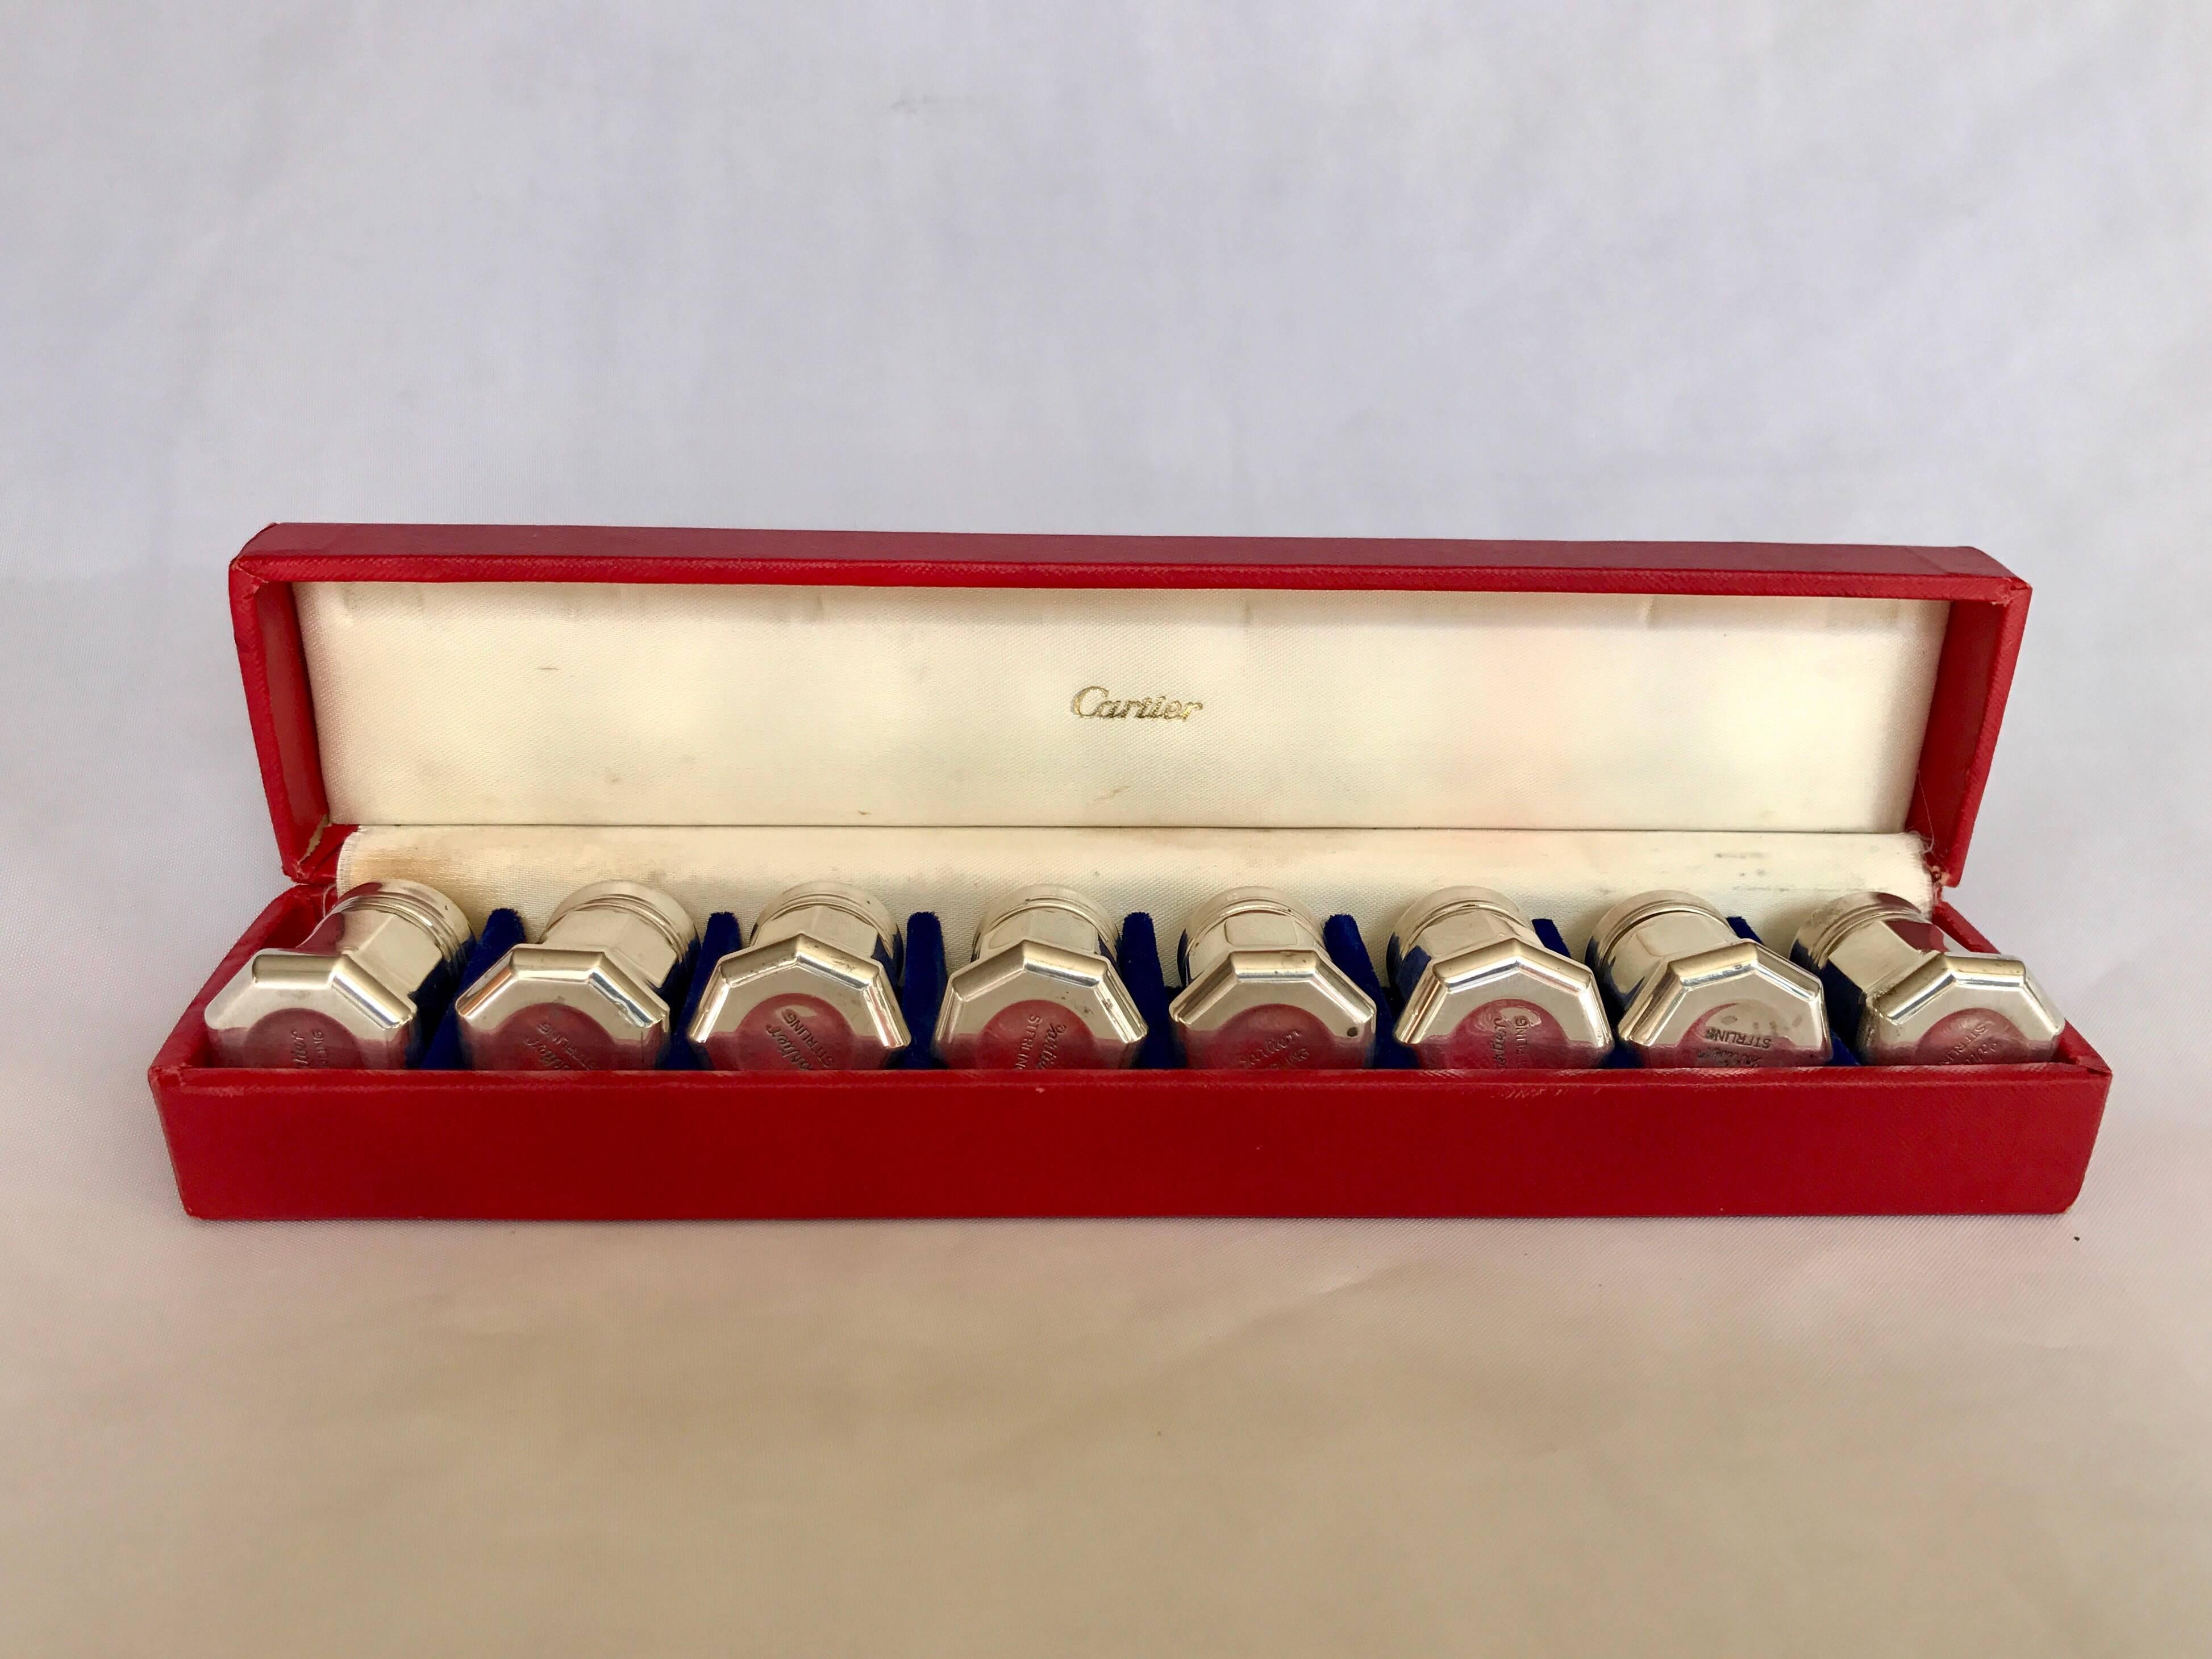 A set of eight sterling silver salts by Cartier in original red satin lined box, circa 1965-1970. All salts stamped underside. In very good to excellent condition and ready for your fine home.
 